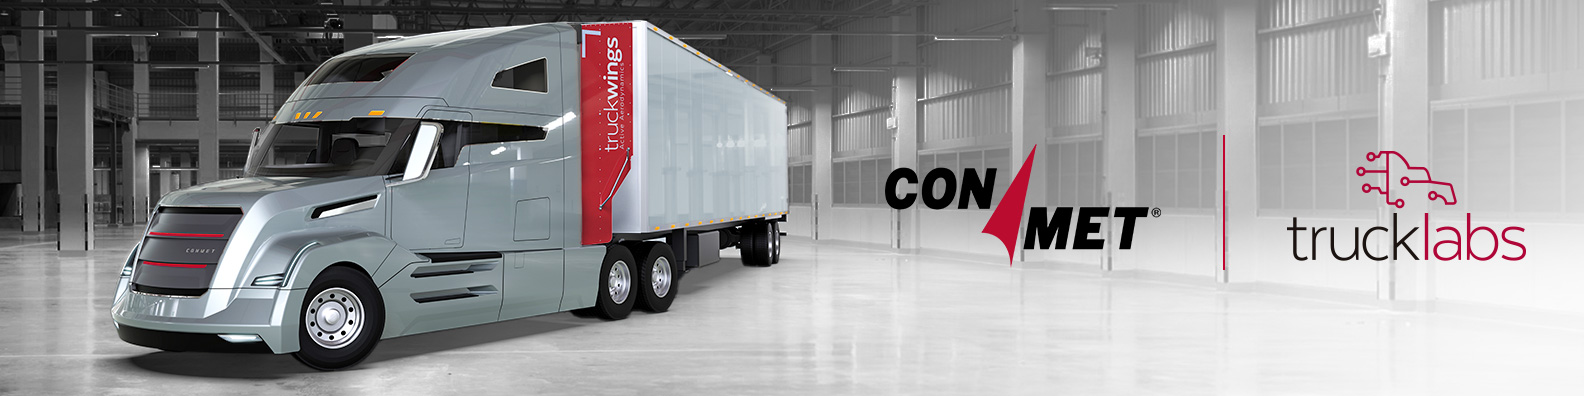 ConMet Trucklabs acquisition announcement showing ConMet Truck with TruckWings on it